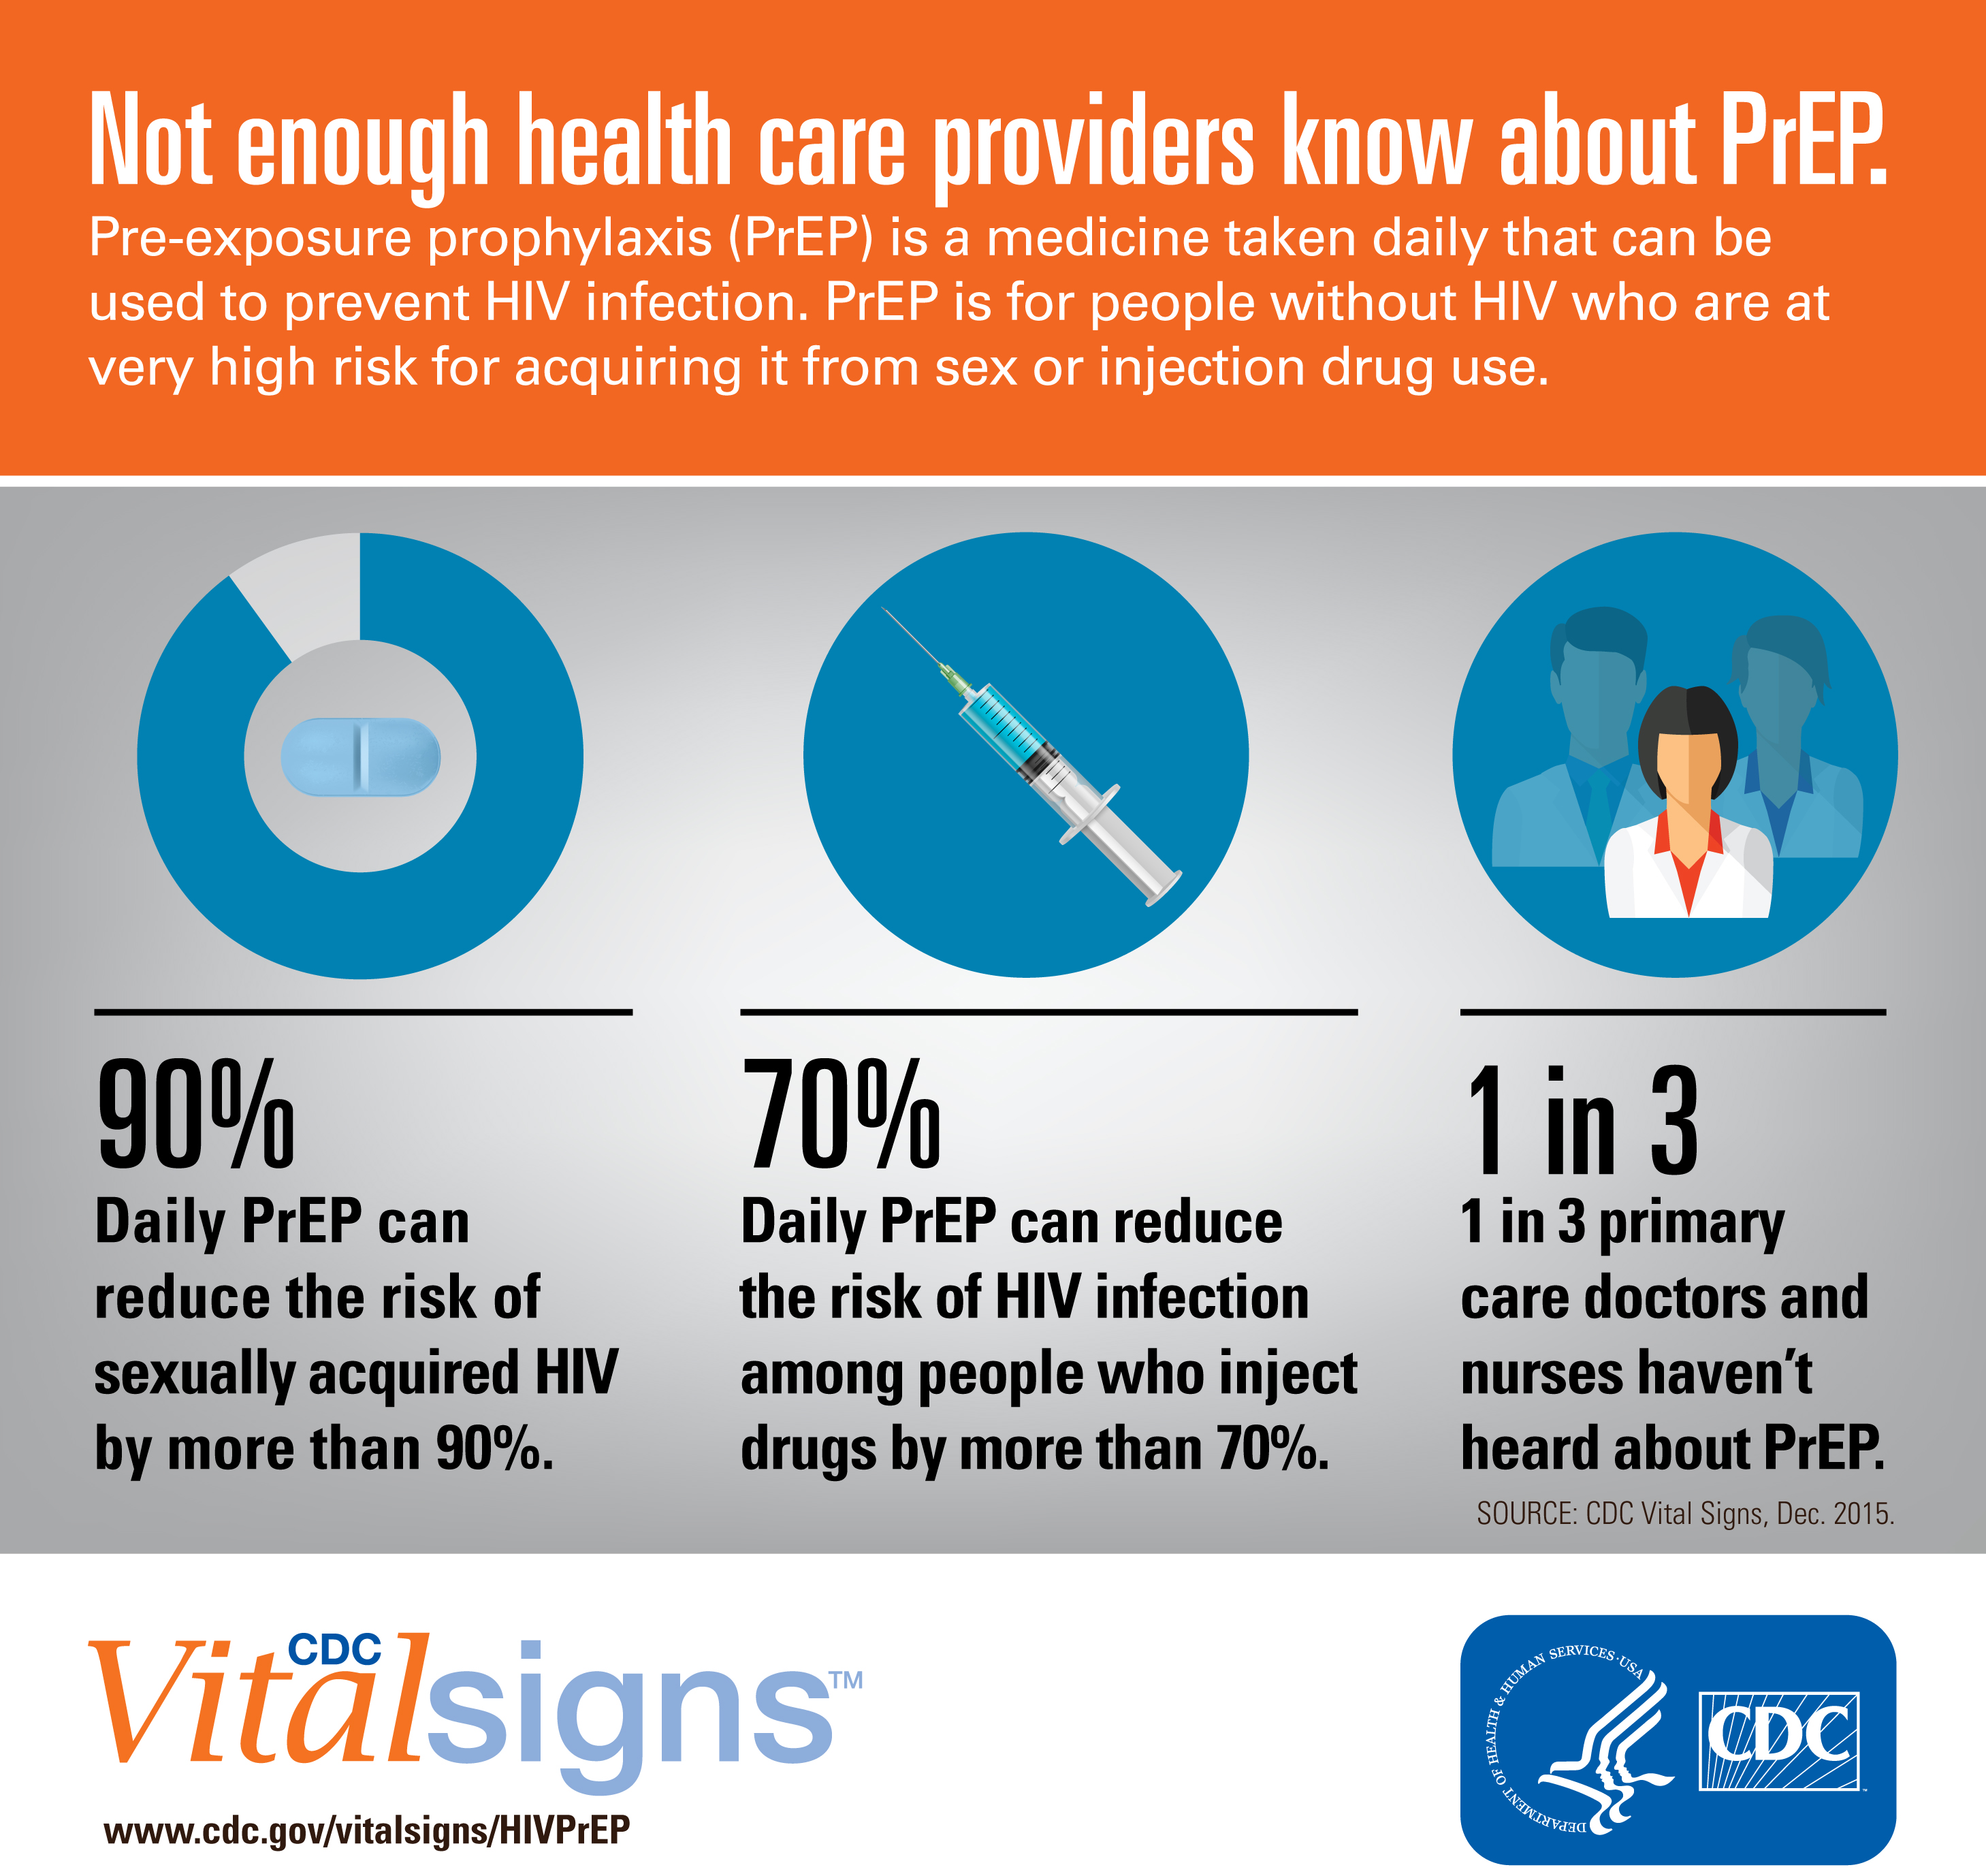 Image from Vital Signs showing that 1 in 3 primary care doctors and nurses have not heard of PrEP.